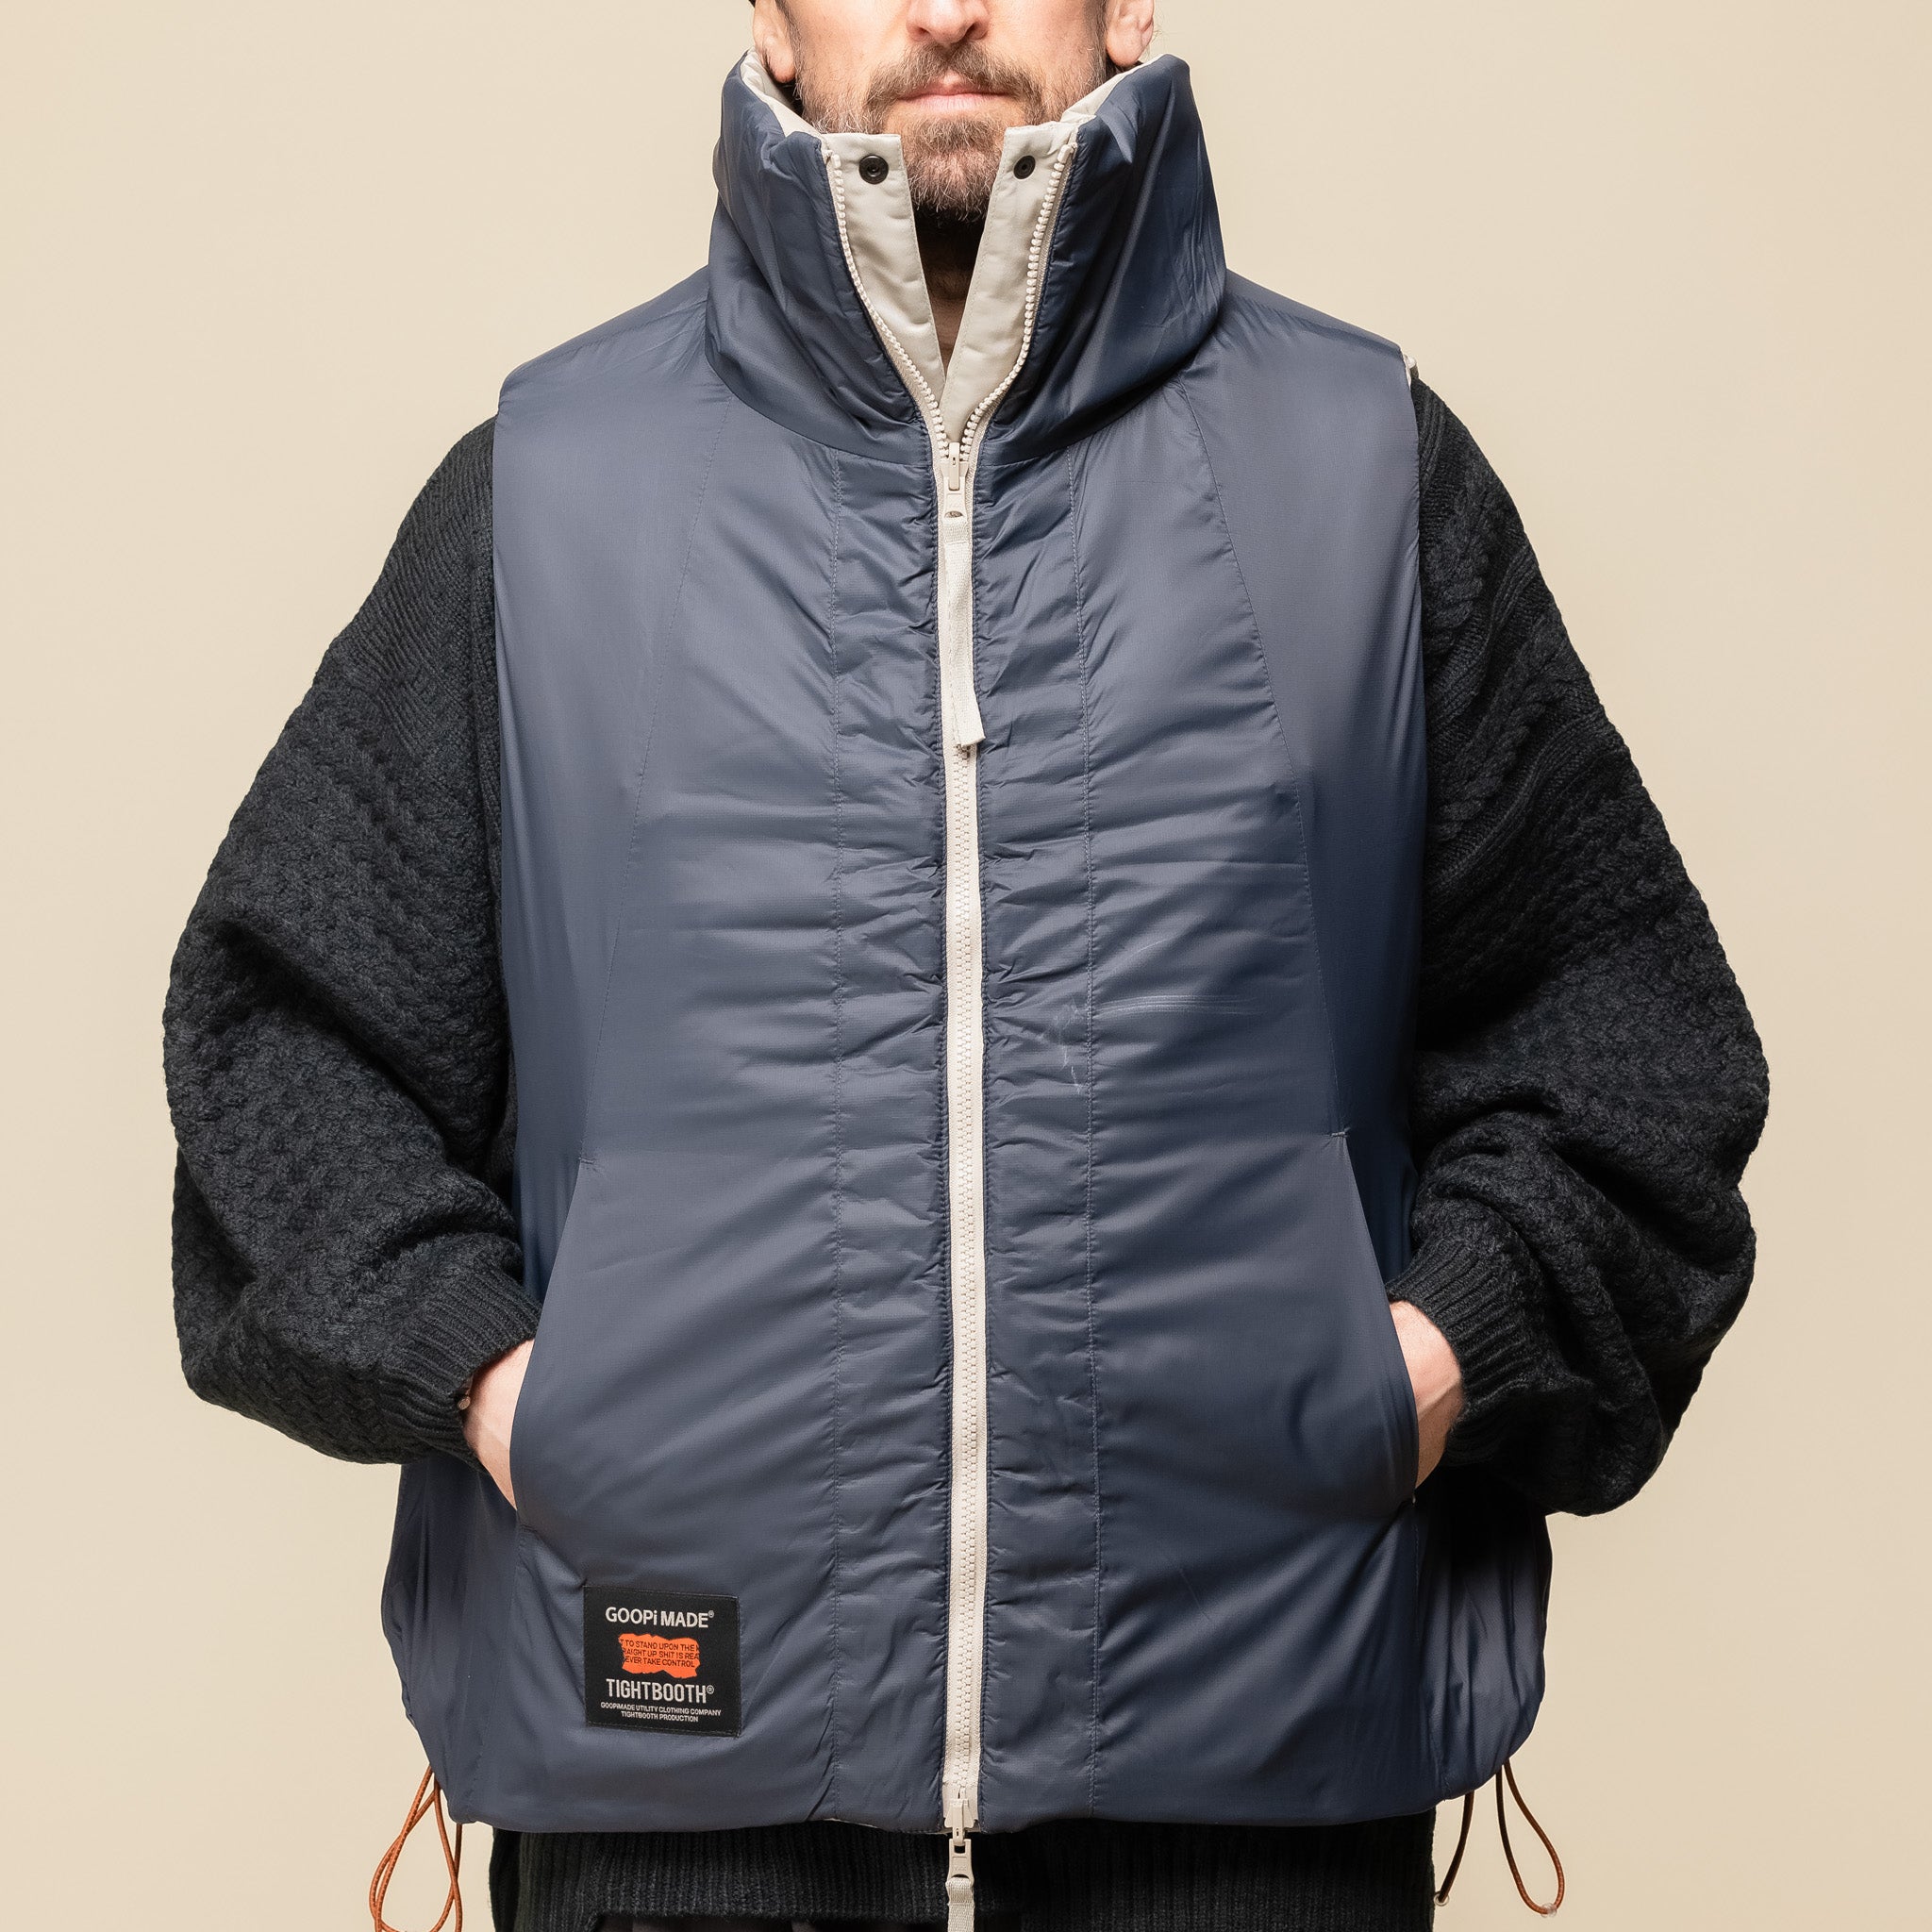 GOOPiMADE® x TIGHTBOOTH “GMT-01V” - 2-Way Padded Down Vest - Paper (Beige) x Navy "goopimade stockists" "goopimade sale" "goopi" "goopi pants" "goopi trousers"